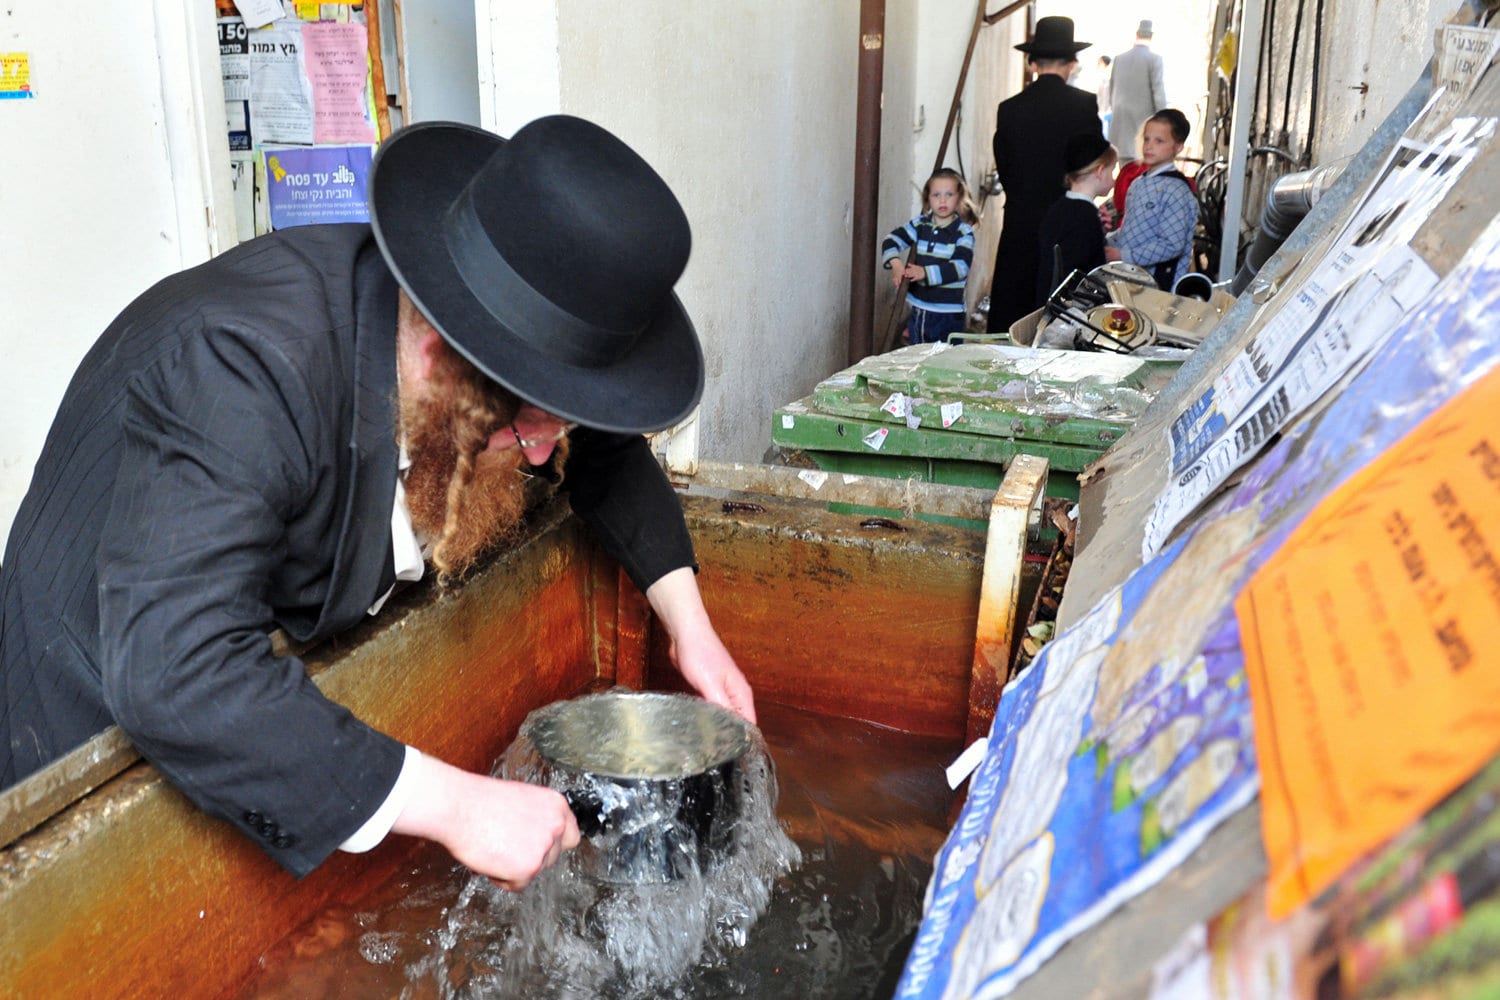 Orthodox Jewish men Koshering Appliances According to Jewish law, pots, dishes, and utensils that are used throughout the year absorb leaven and therefore not be used on Passover.